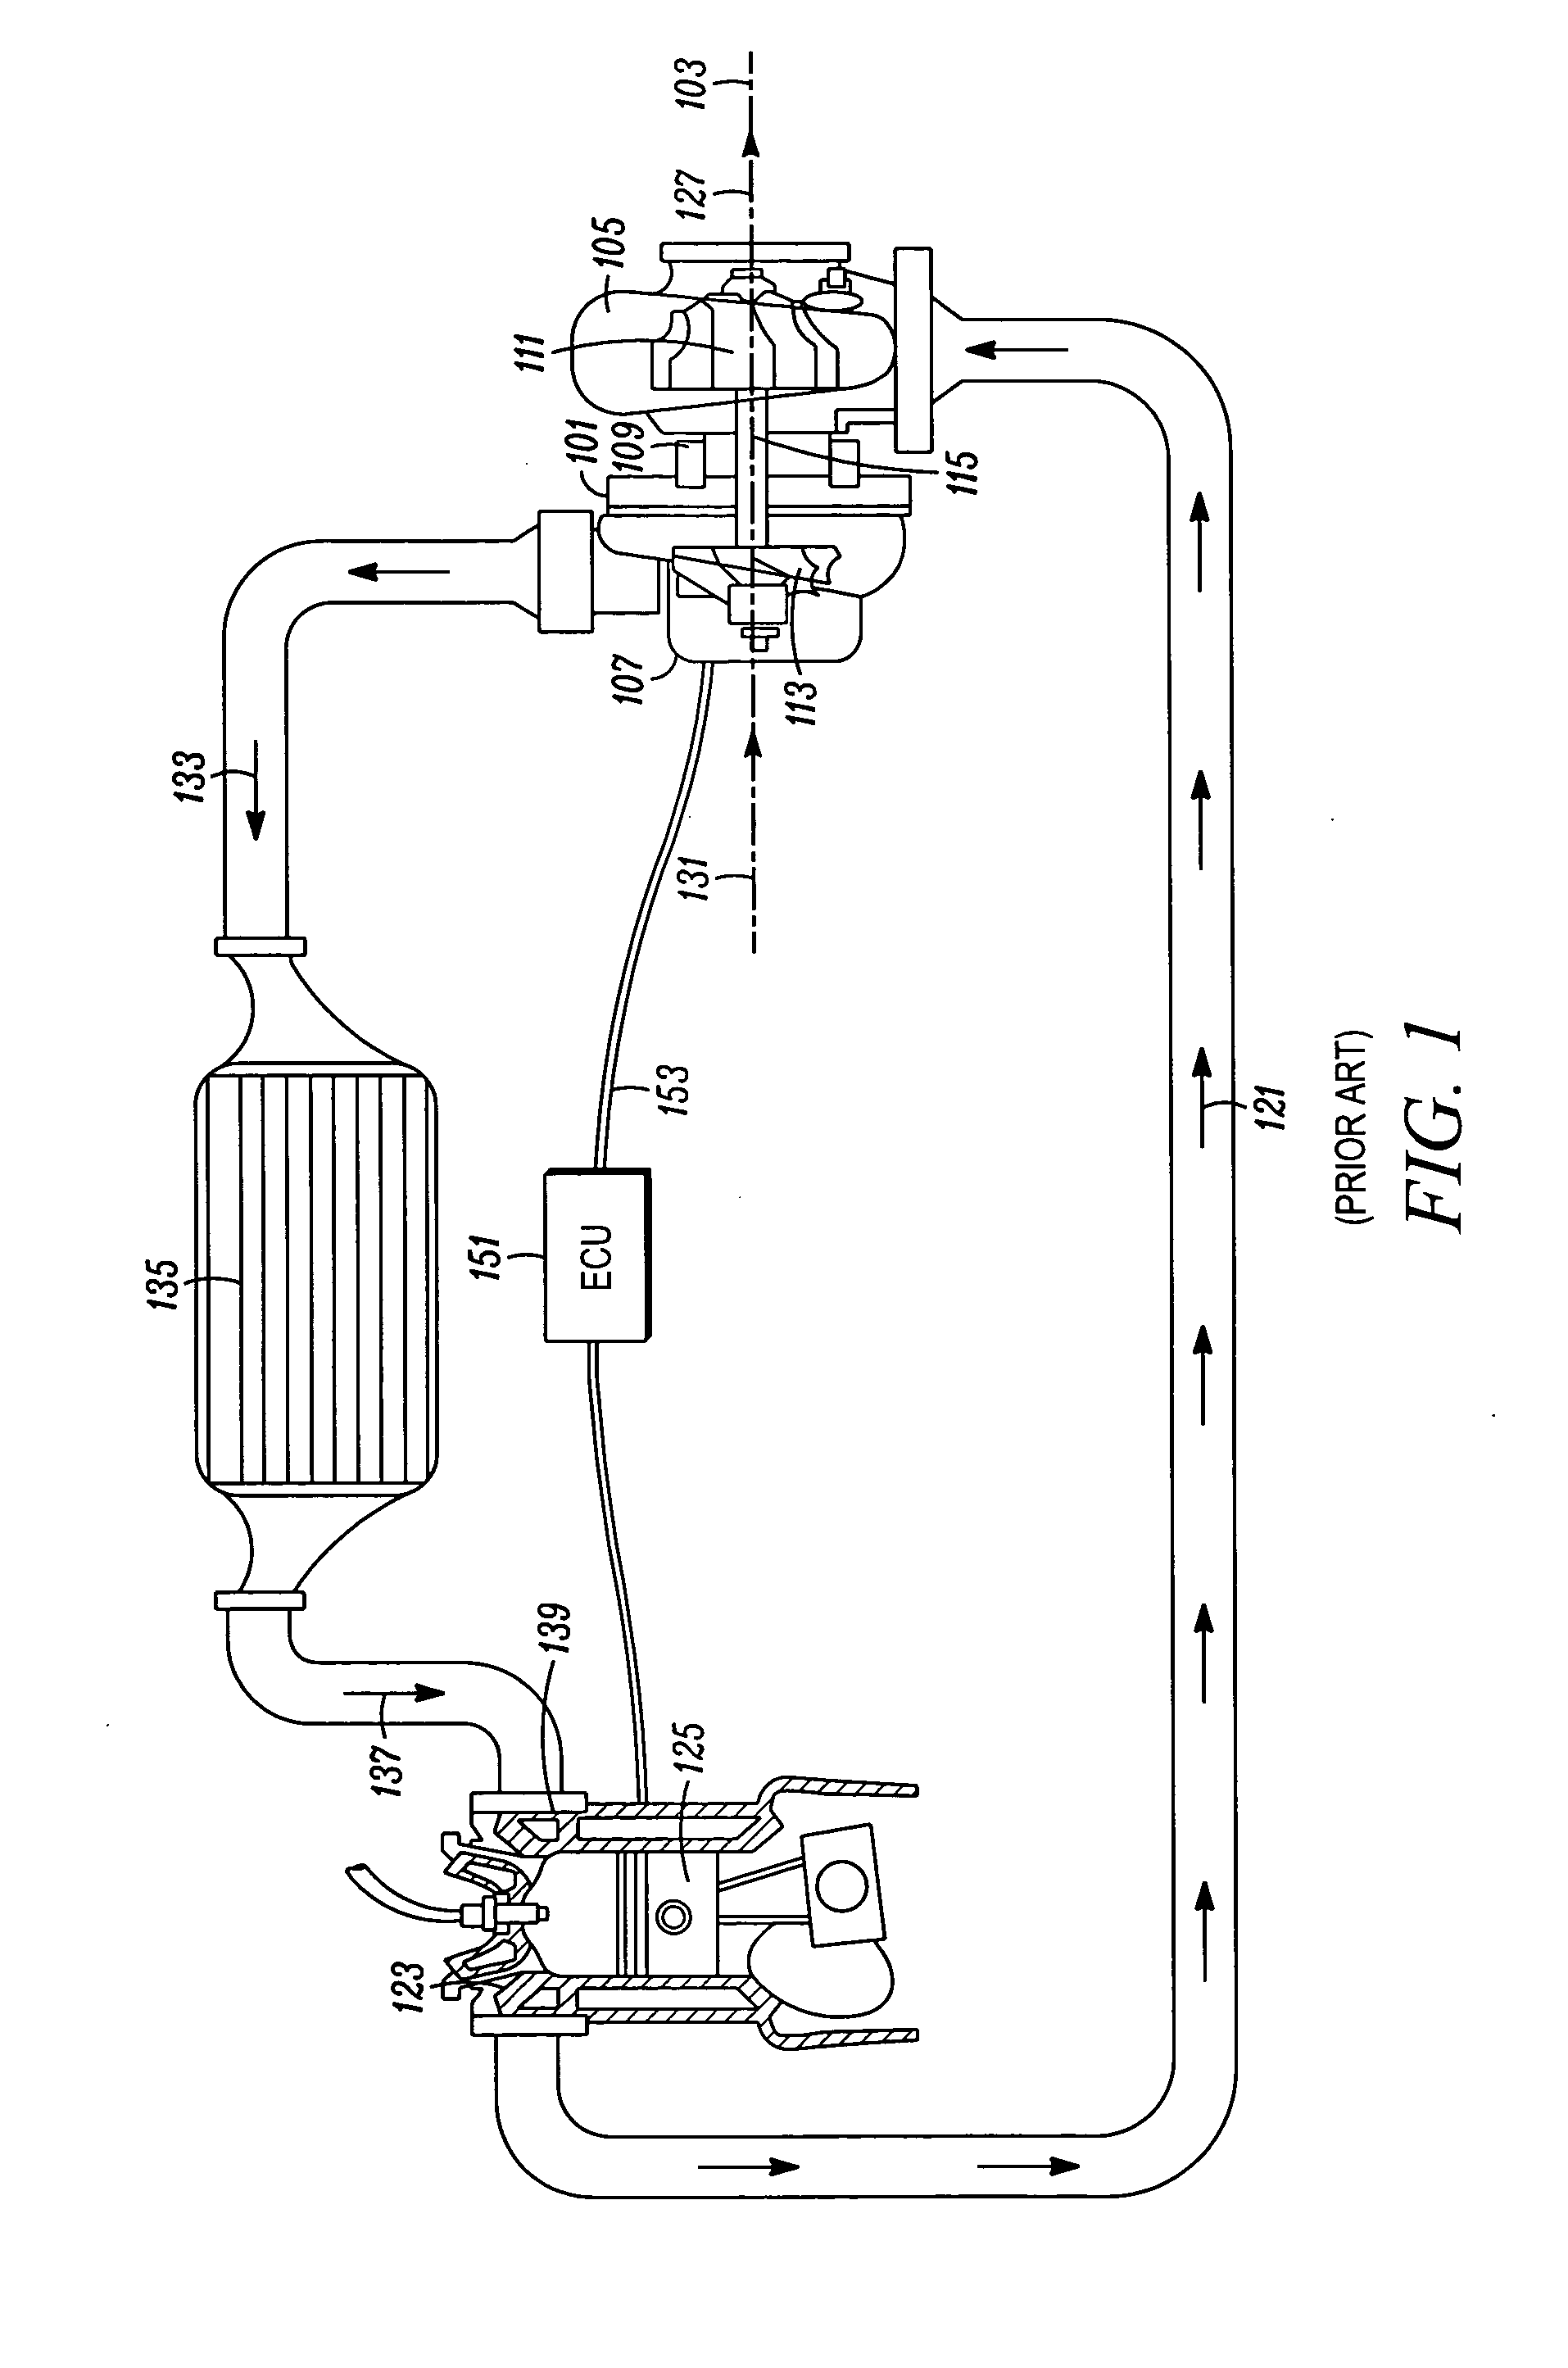 Axial turbine with parallel flow compressor